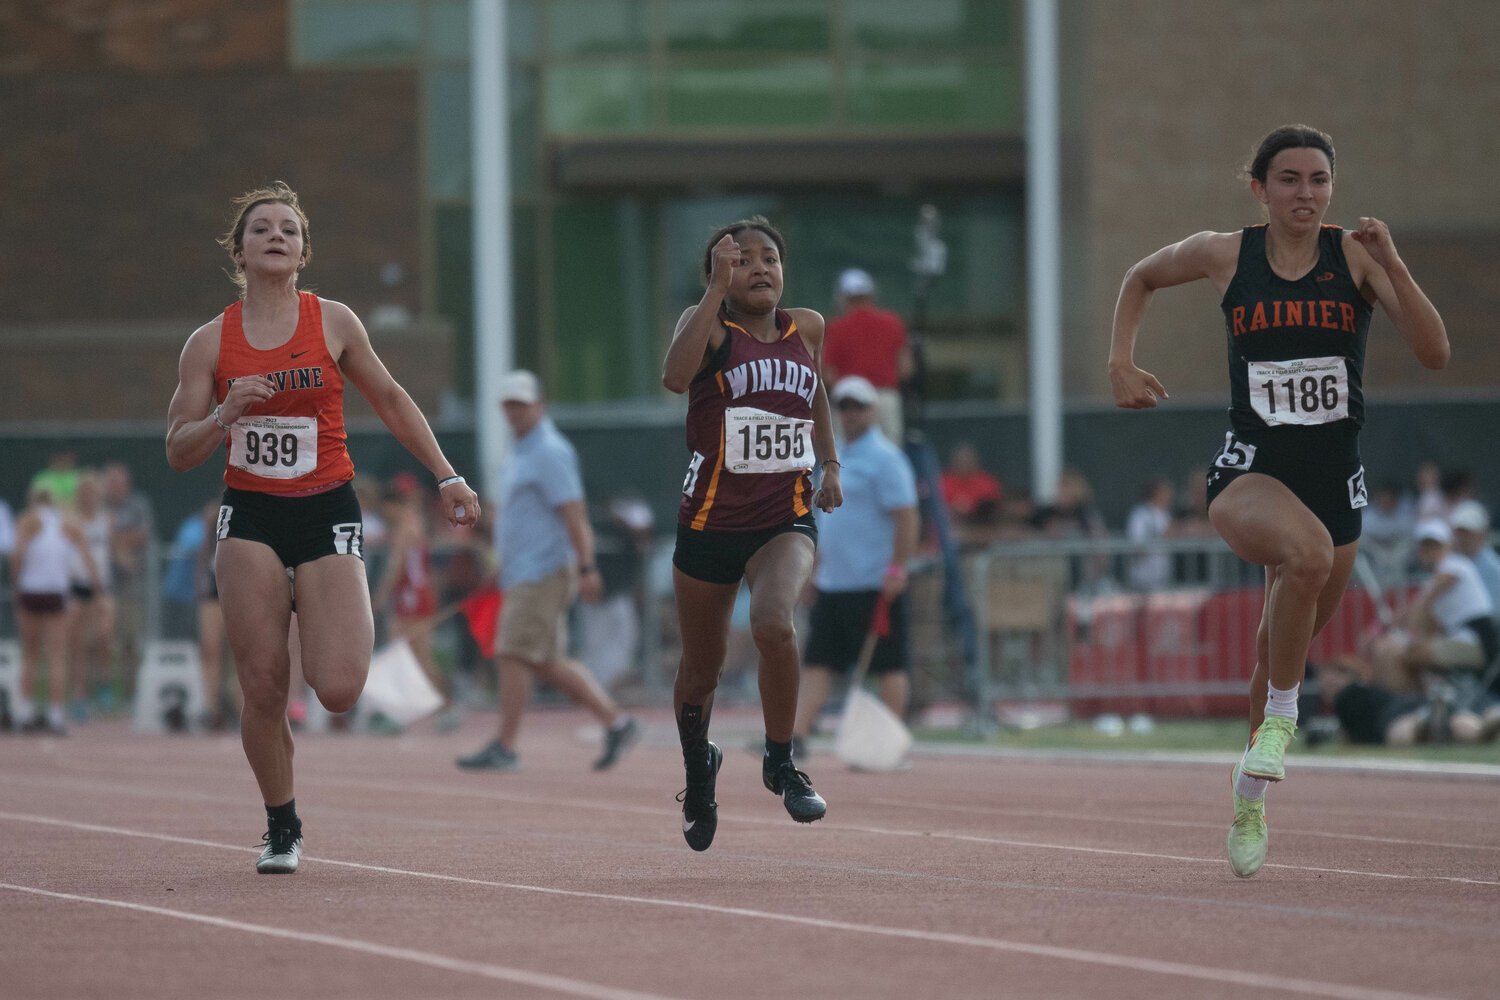 Napavine's Maddie Dickinson (left), Winlock's Victoria Sancho (center), and Rainier's Acacia Murphy (right) run in a prelim heat of the 100-meter dash at the 2B state championships at Zaepfel Stadium in Yakima on May 25.